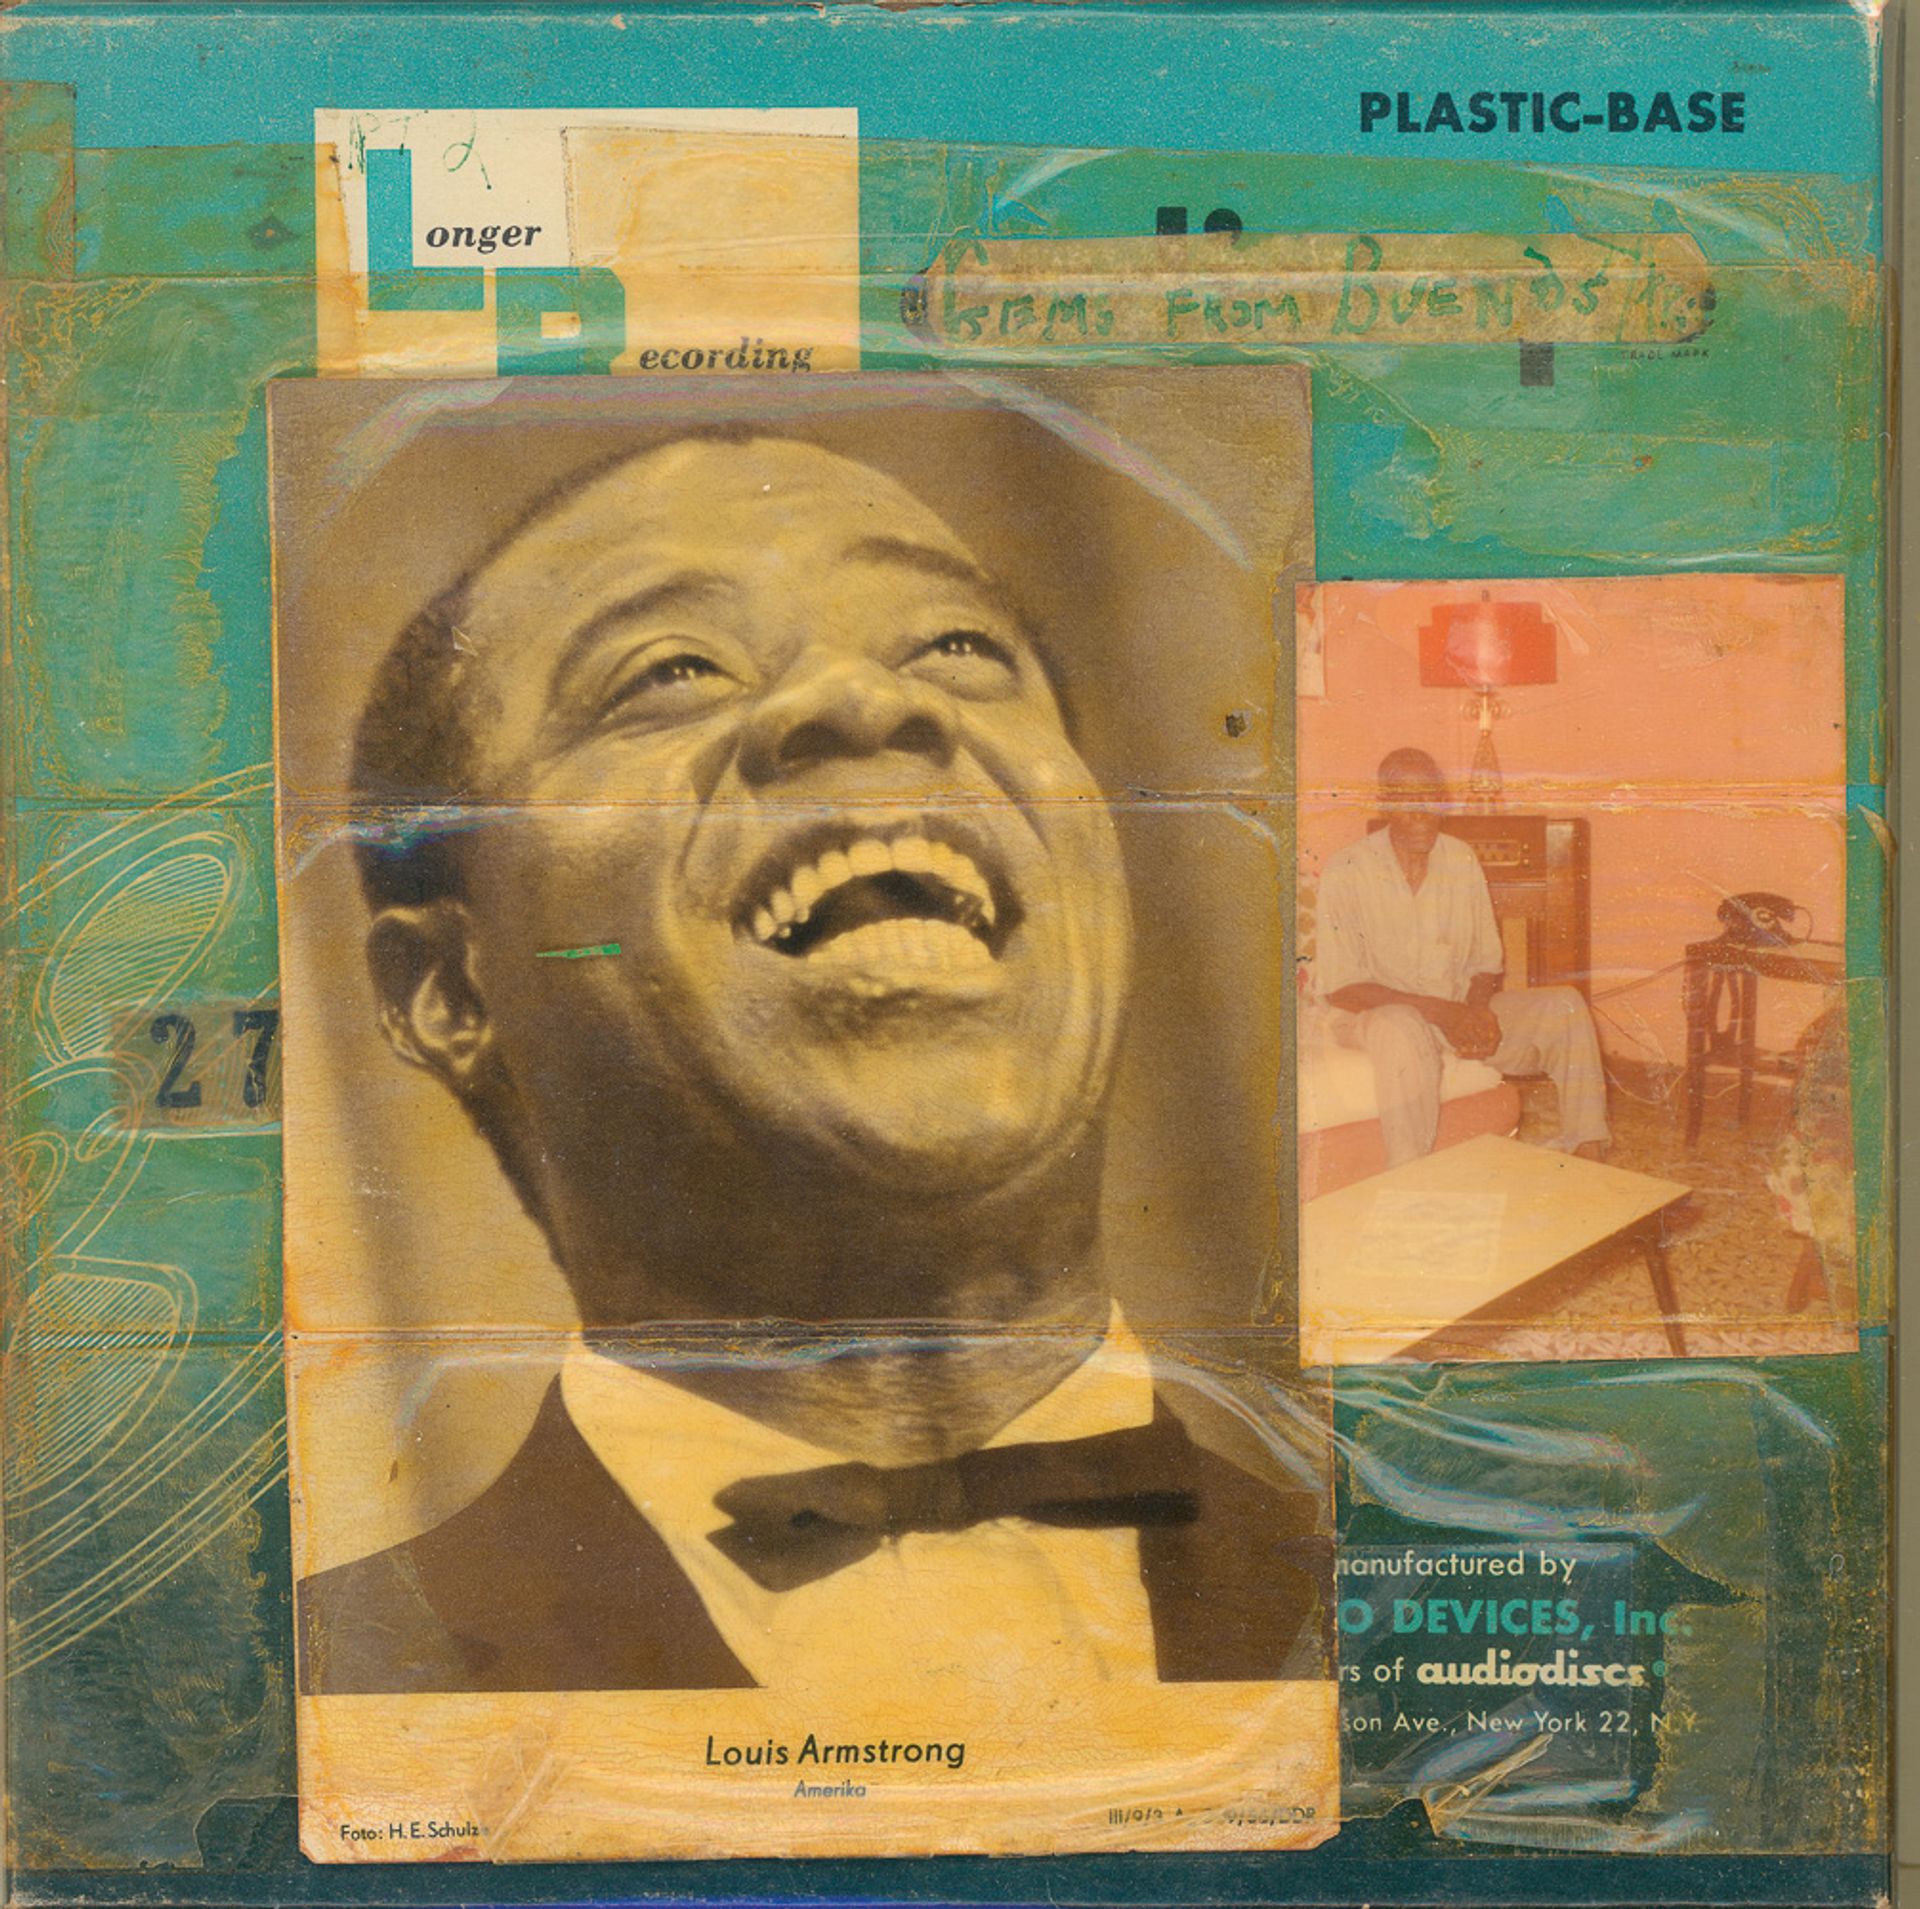 Louis Armstrong’s collages will be shown outside New York for the first time Courtesy of the Louis Armstrong House Museum, Queens, New York